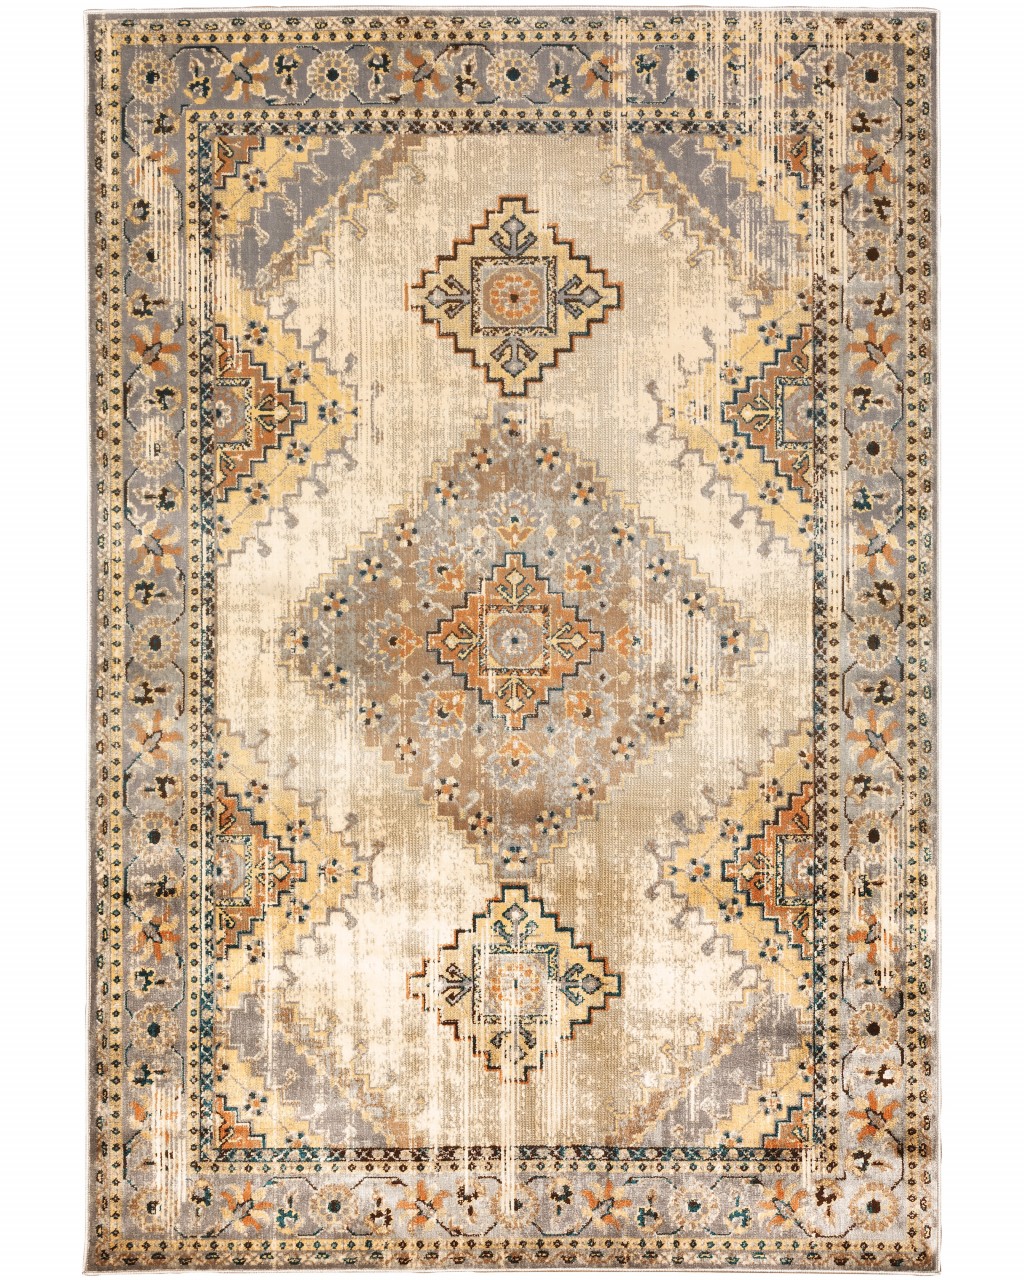 4’ X 6’ Gray And Beige Aztec Pattern Area Rug-387925-1